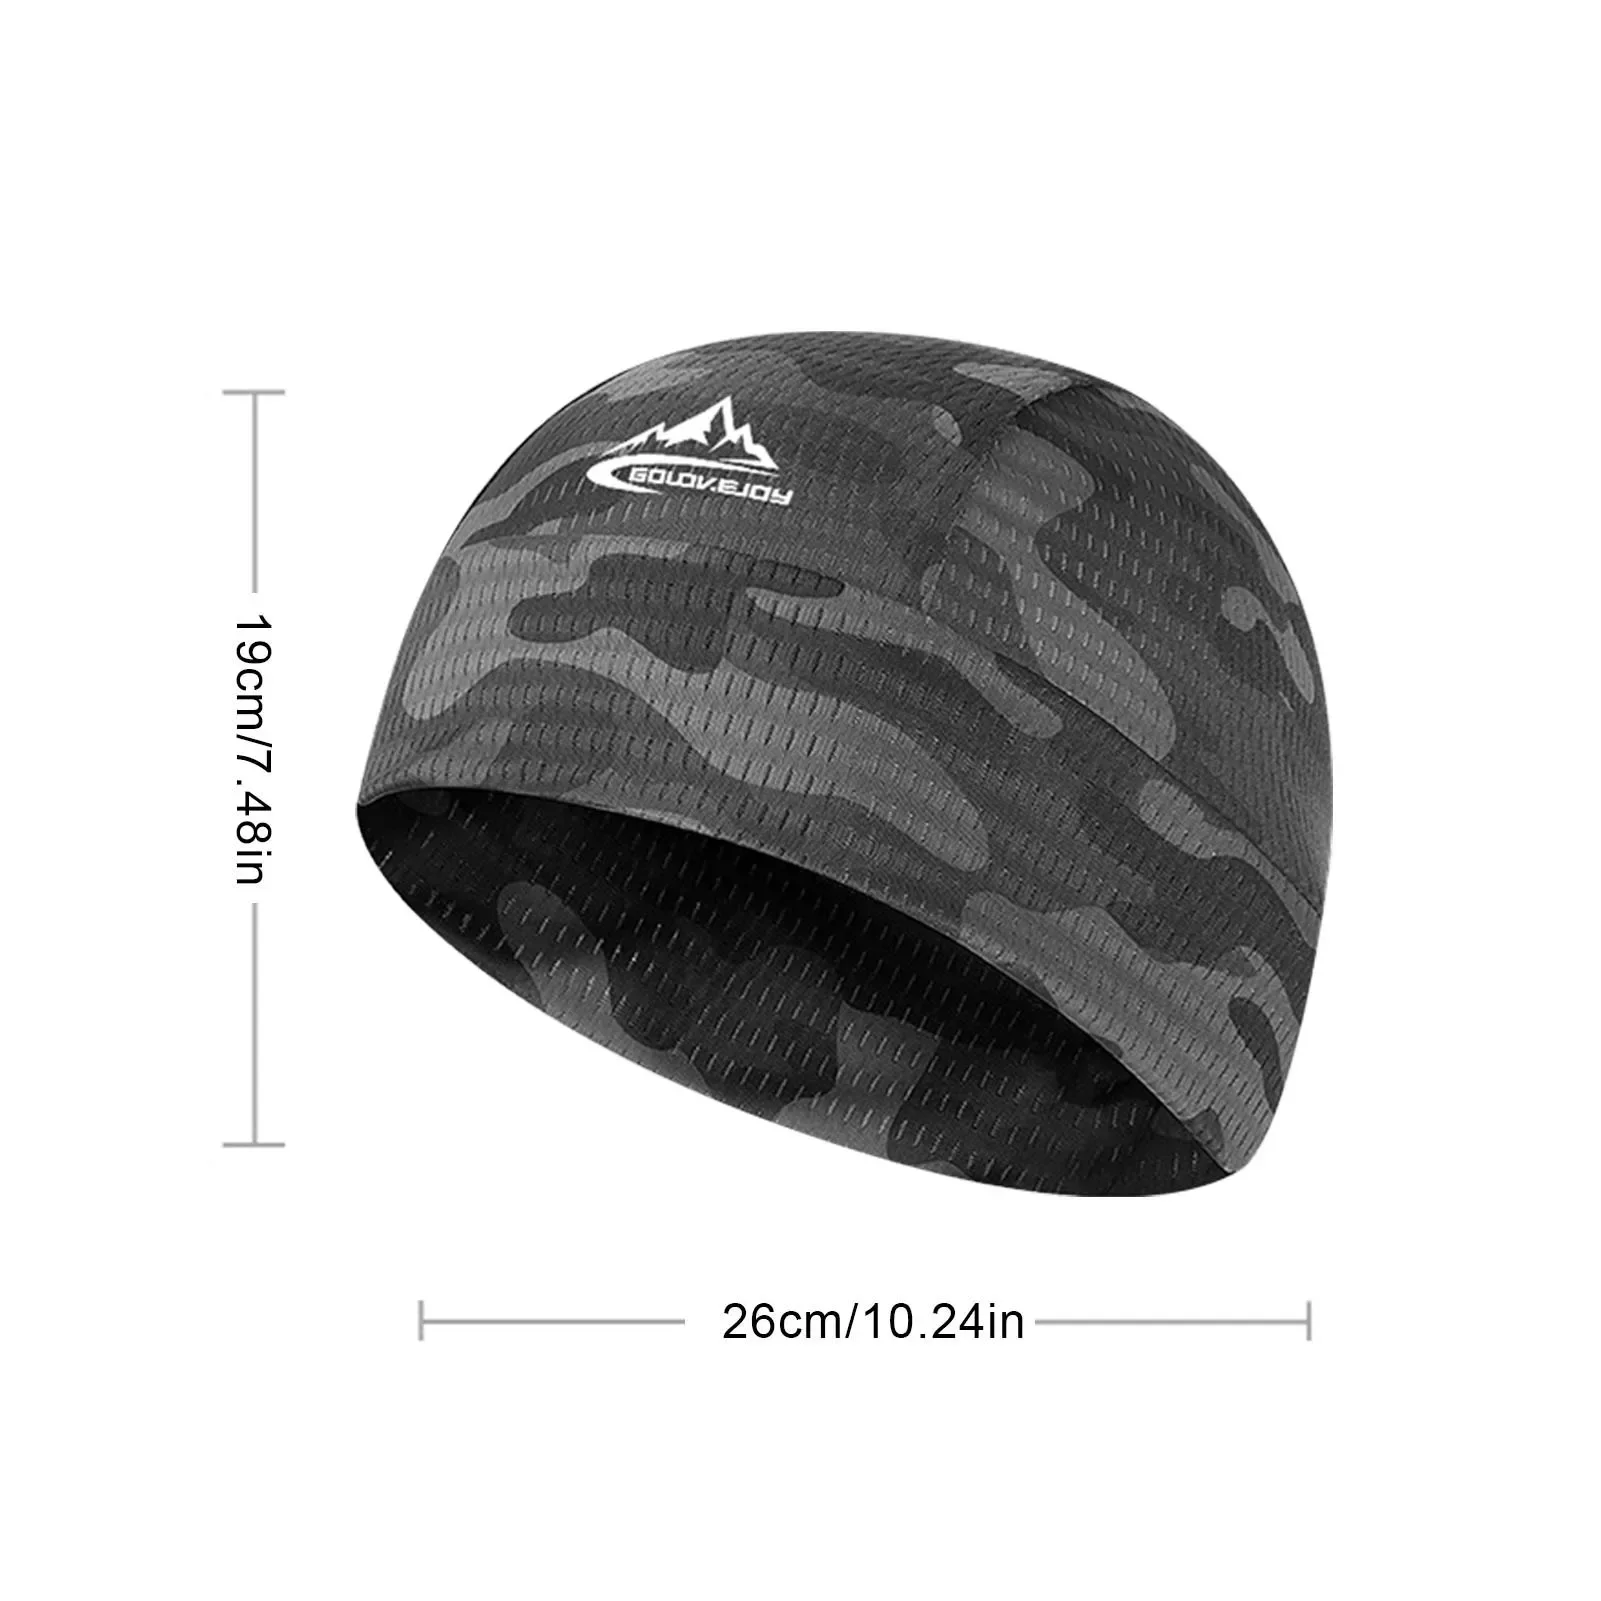 Motorcycle Riding Helmet Lining Hat Cooling Breathable Sweat Wicking Cycling Running Cap Helmet Liner Under Helmets